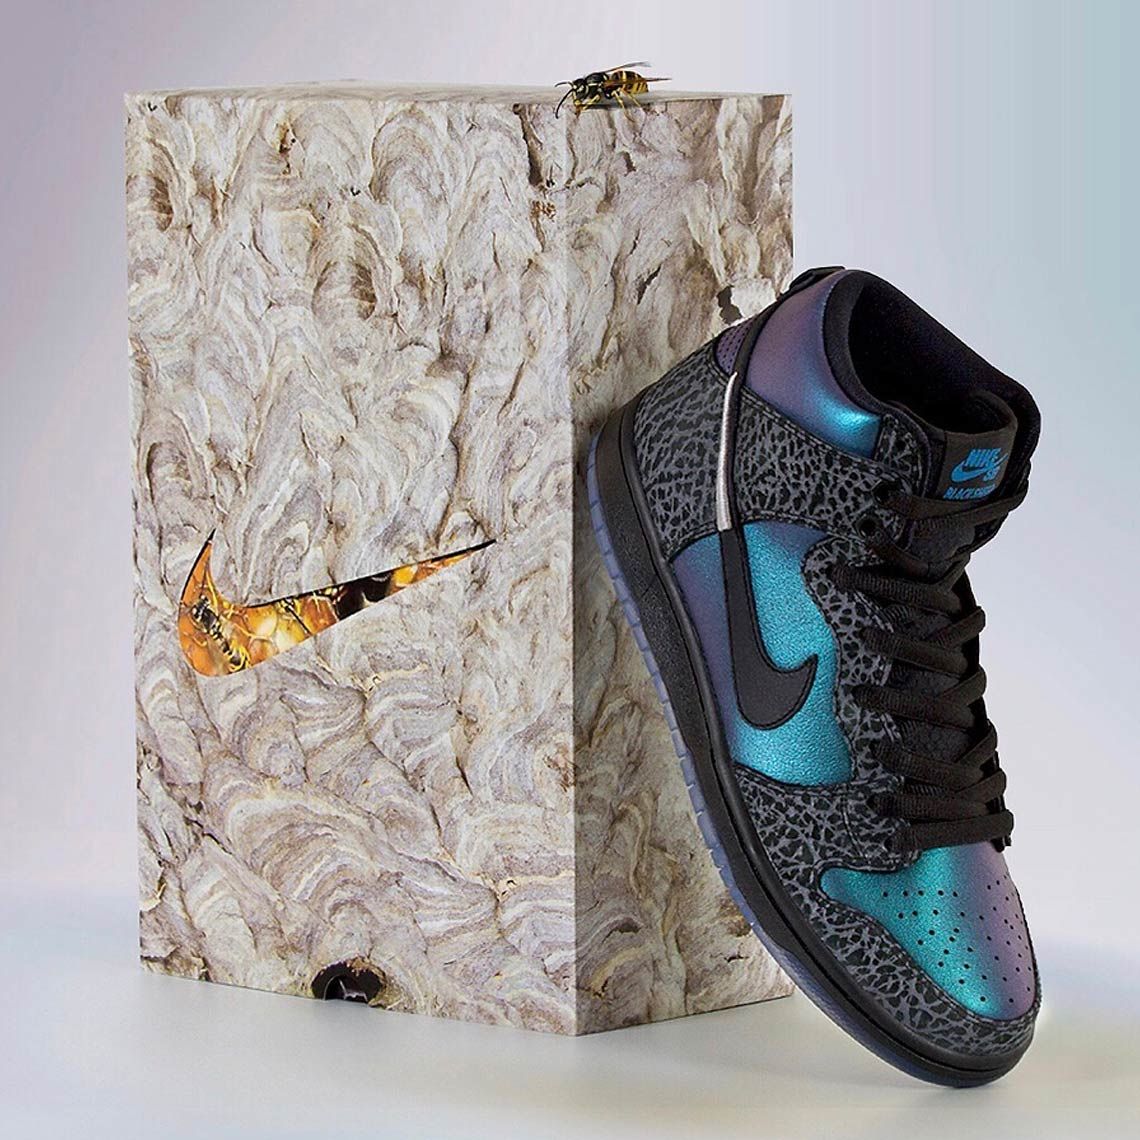 Black Sheep Reveals Exclusive Packaging For The Nike SB Dunk “Black Hornet”  | House of Heat°